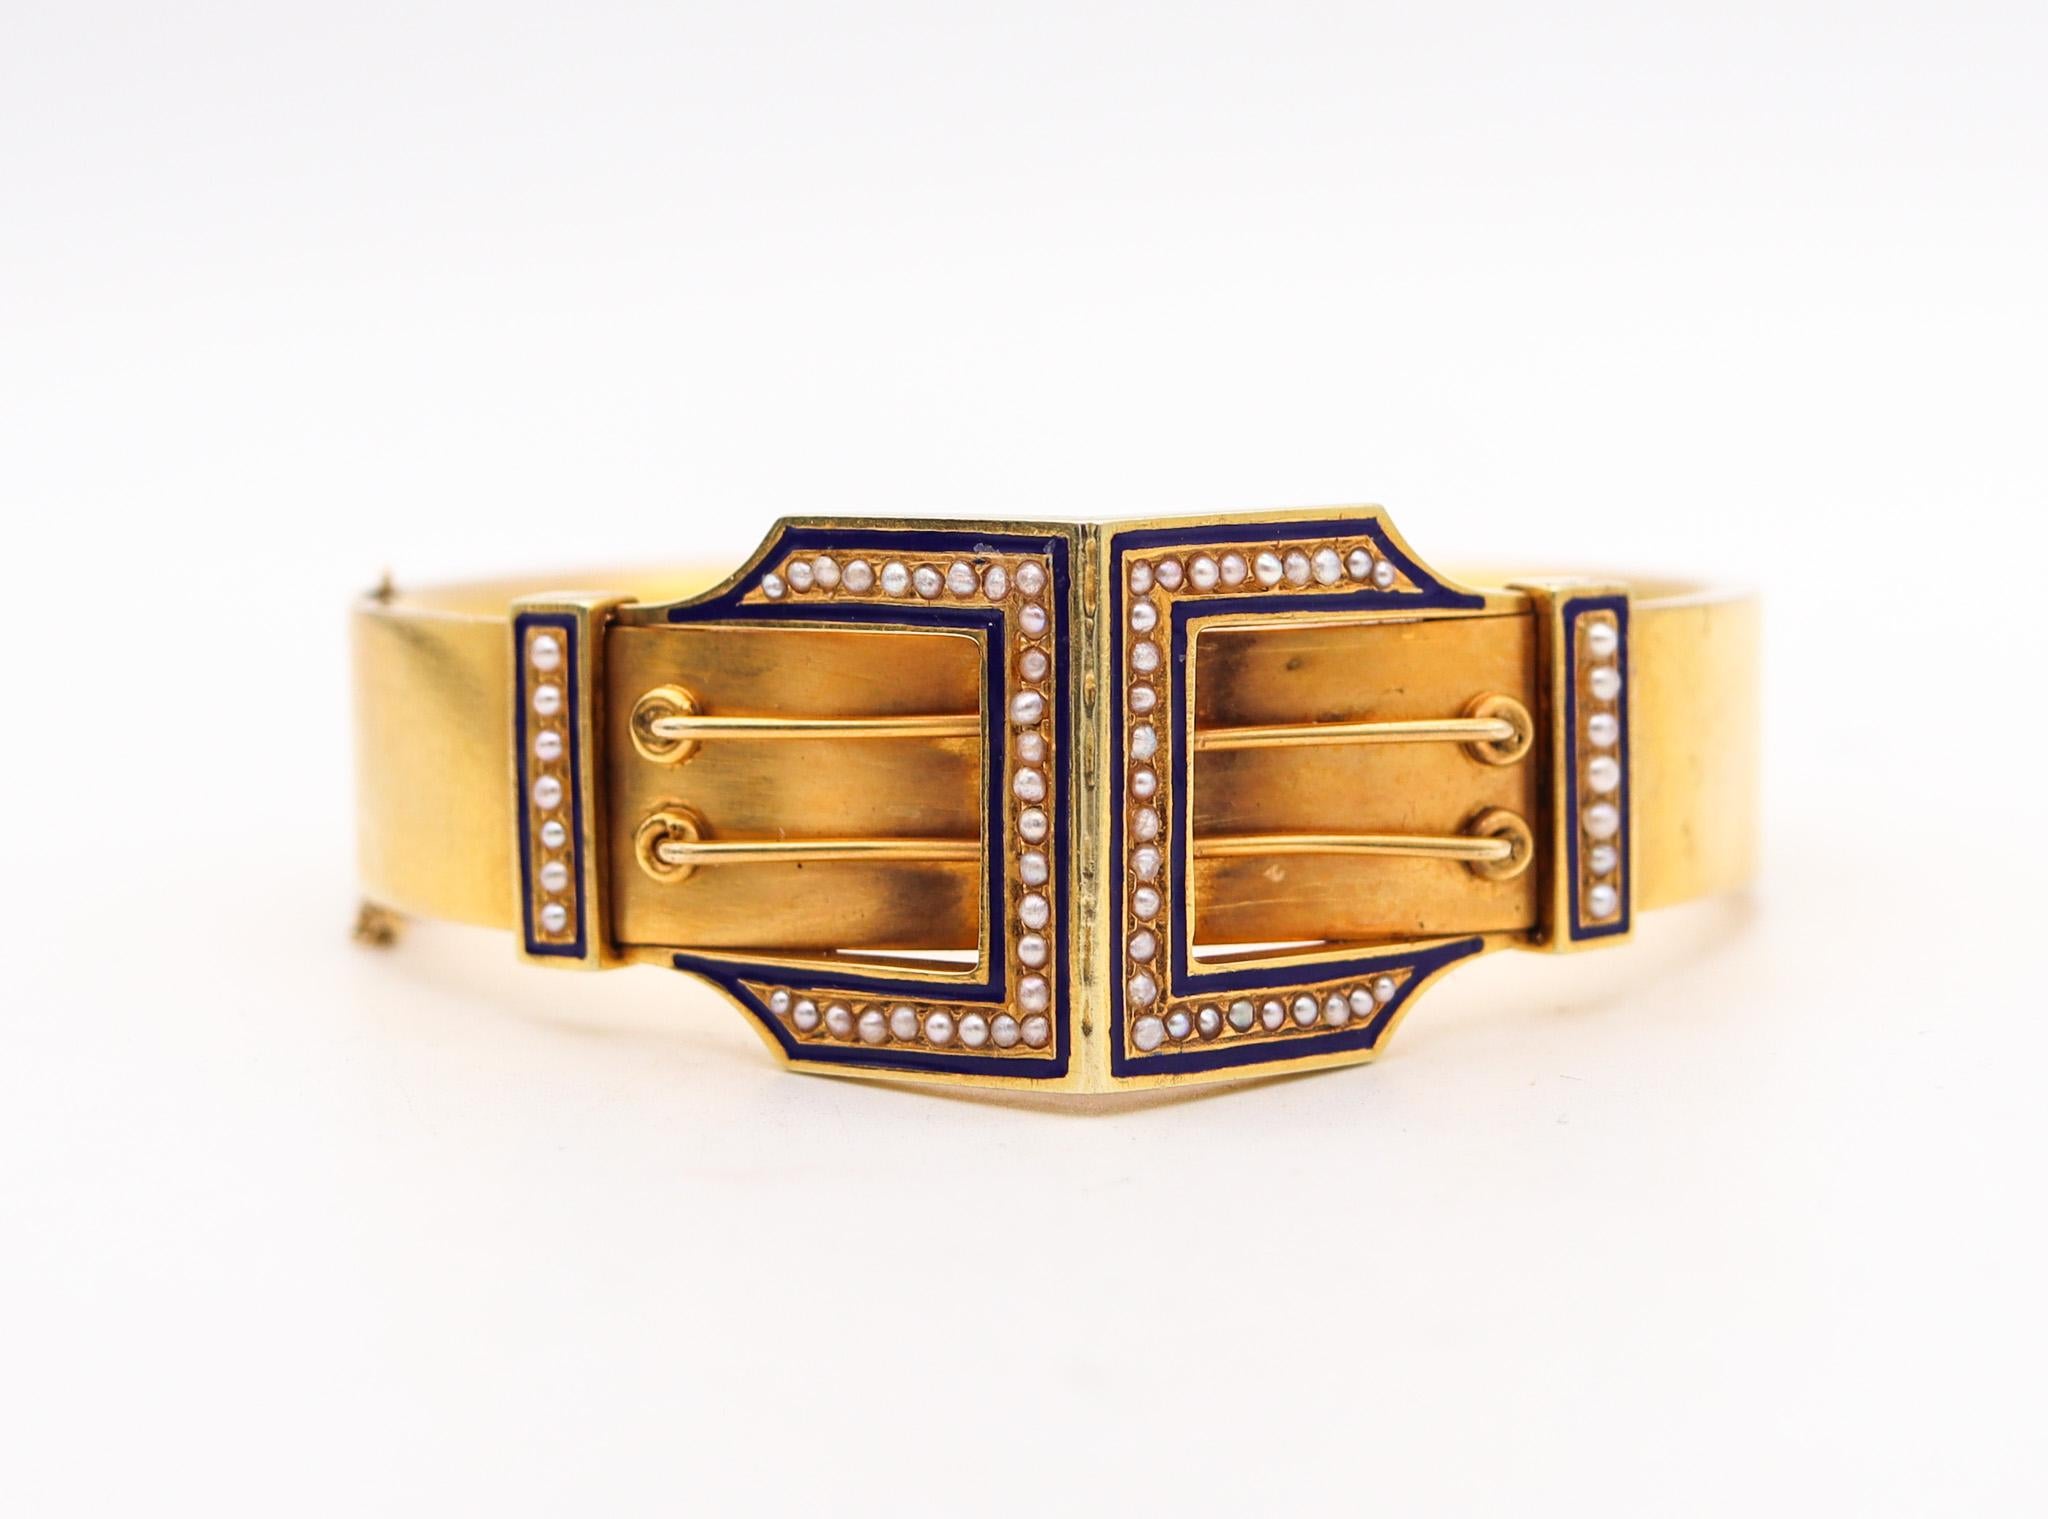 Victorian Etruscan Revival bracelet.

An outstanding classic bracelet, created in England during the Victorian Era (1837-1901), circa 1870. This bangle bracelet has been carefully crafted in solid yellow gold of 16 karats (0.667/.999 Au), with an